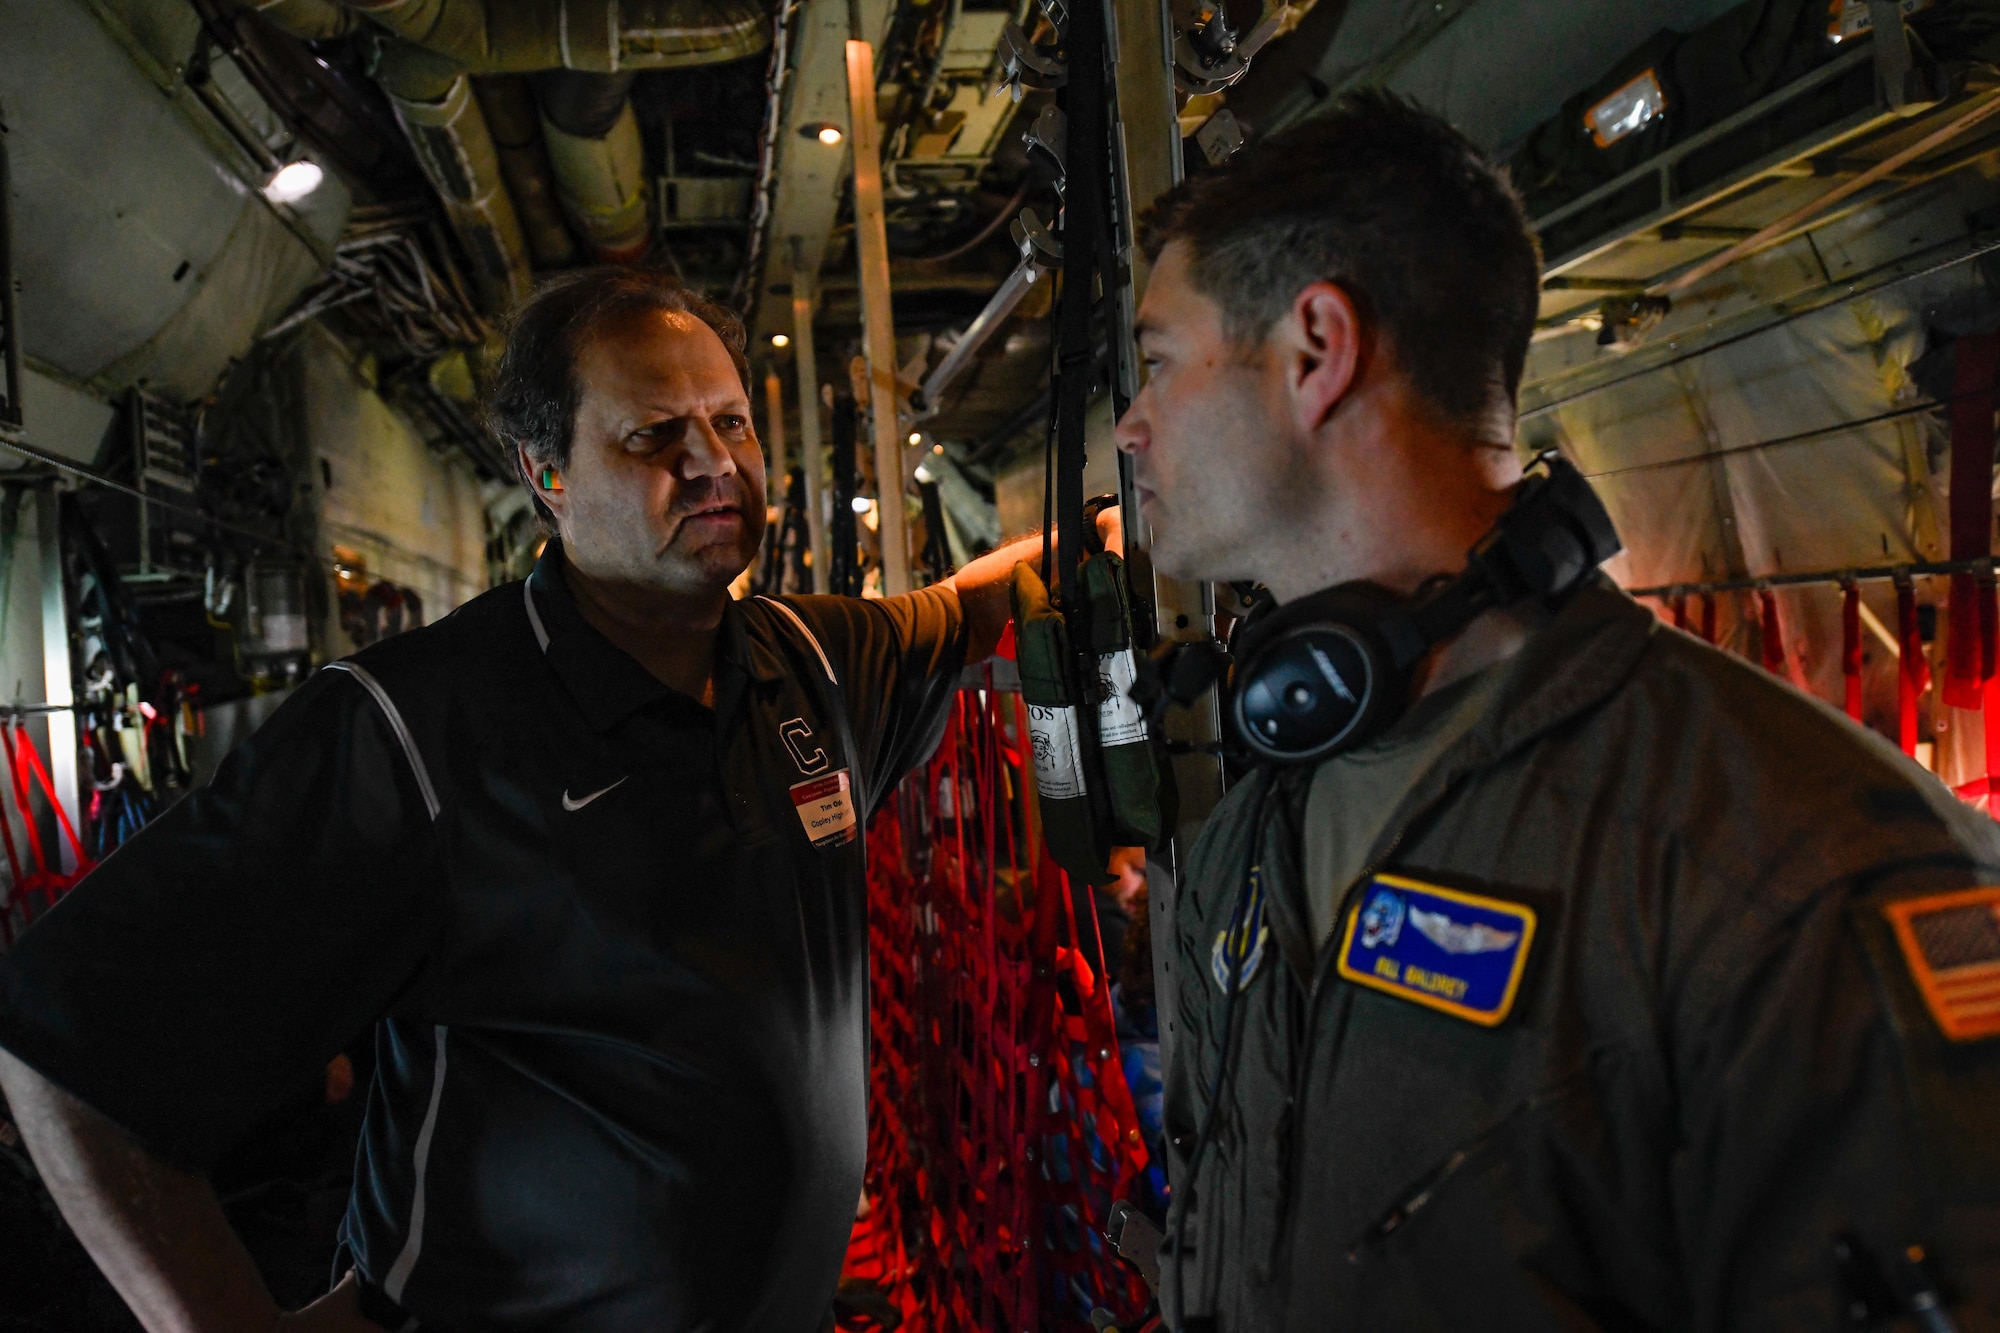 Tim Oden, a counselor at Copley High School, talks with 1st Lt. Bill Baldrey, a pilot assigned to the 757th Airlift Squadron, on a C-130H Hercules aircraft assigned to the 910th Airlift Wing on course back to Youngstown Air Reserve Station after circling Niagara Falls, April 27, 2023.